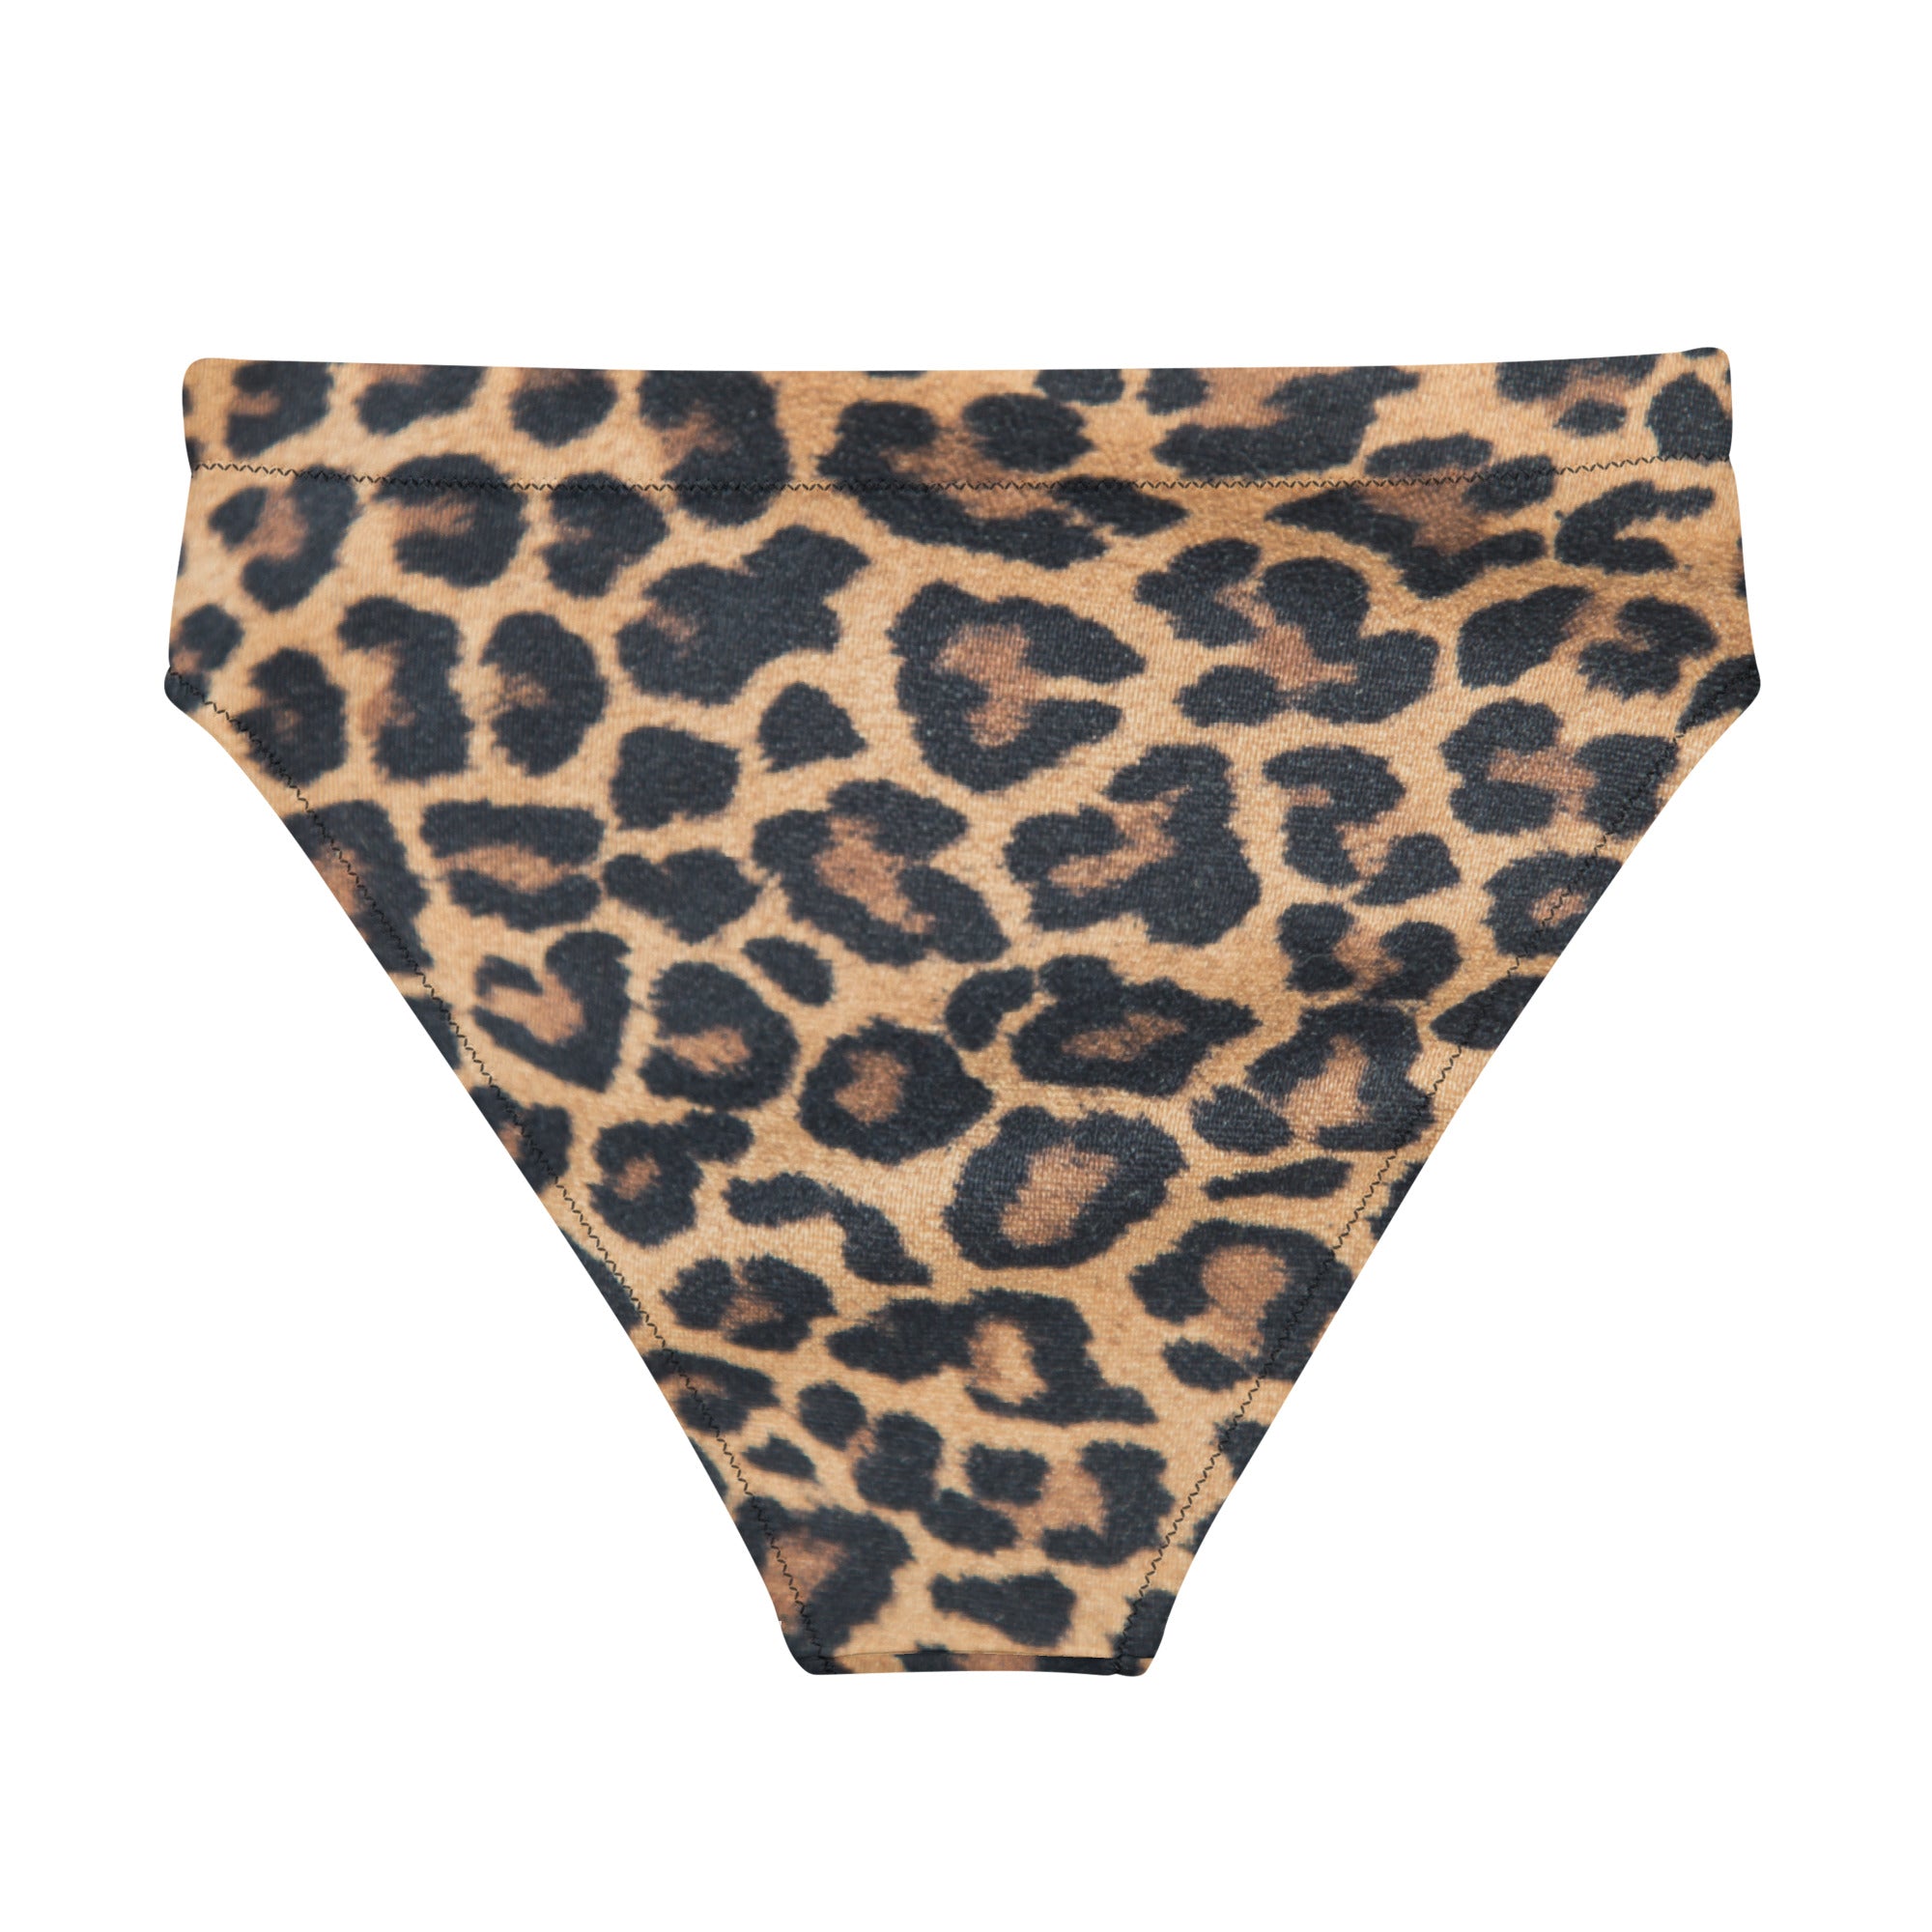 Dive into a world of untamed fashion with our leopard print bikini bottoms.